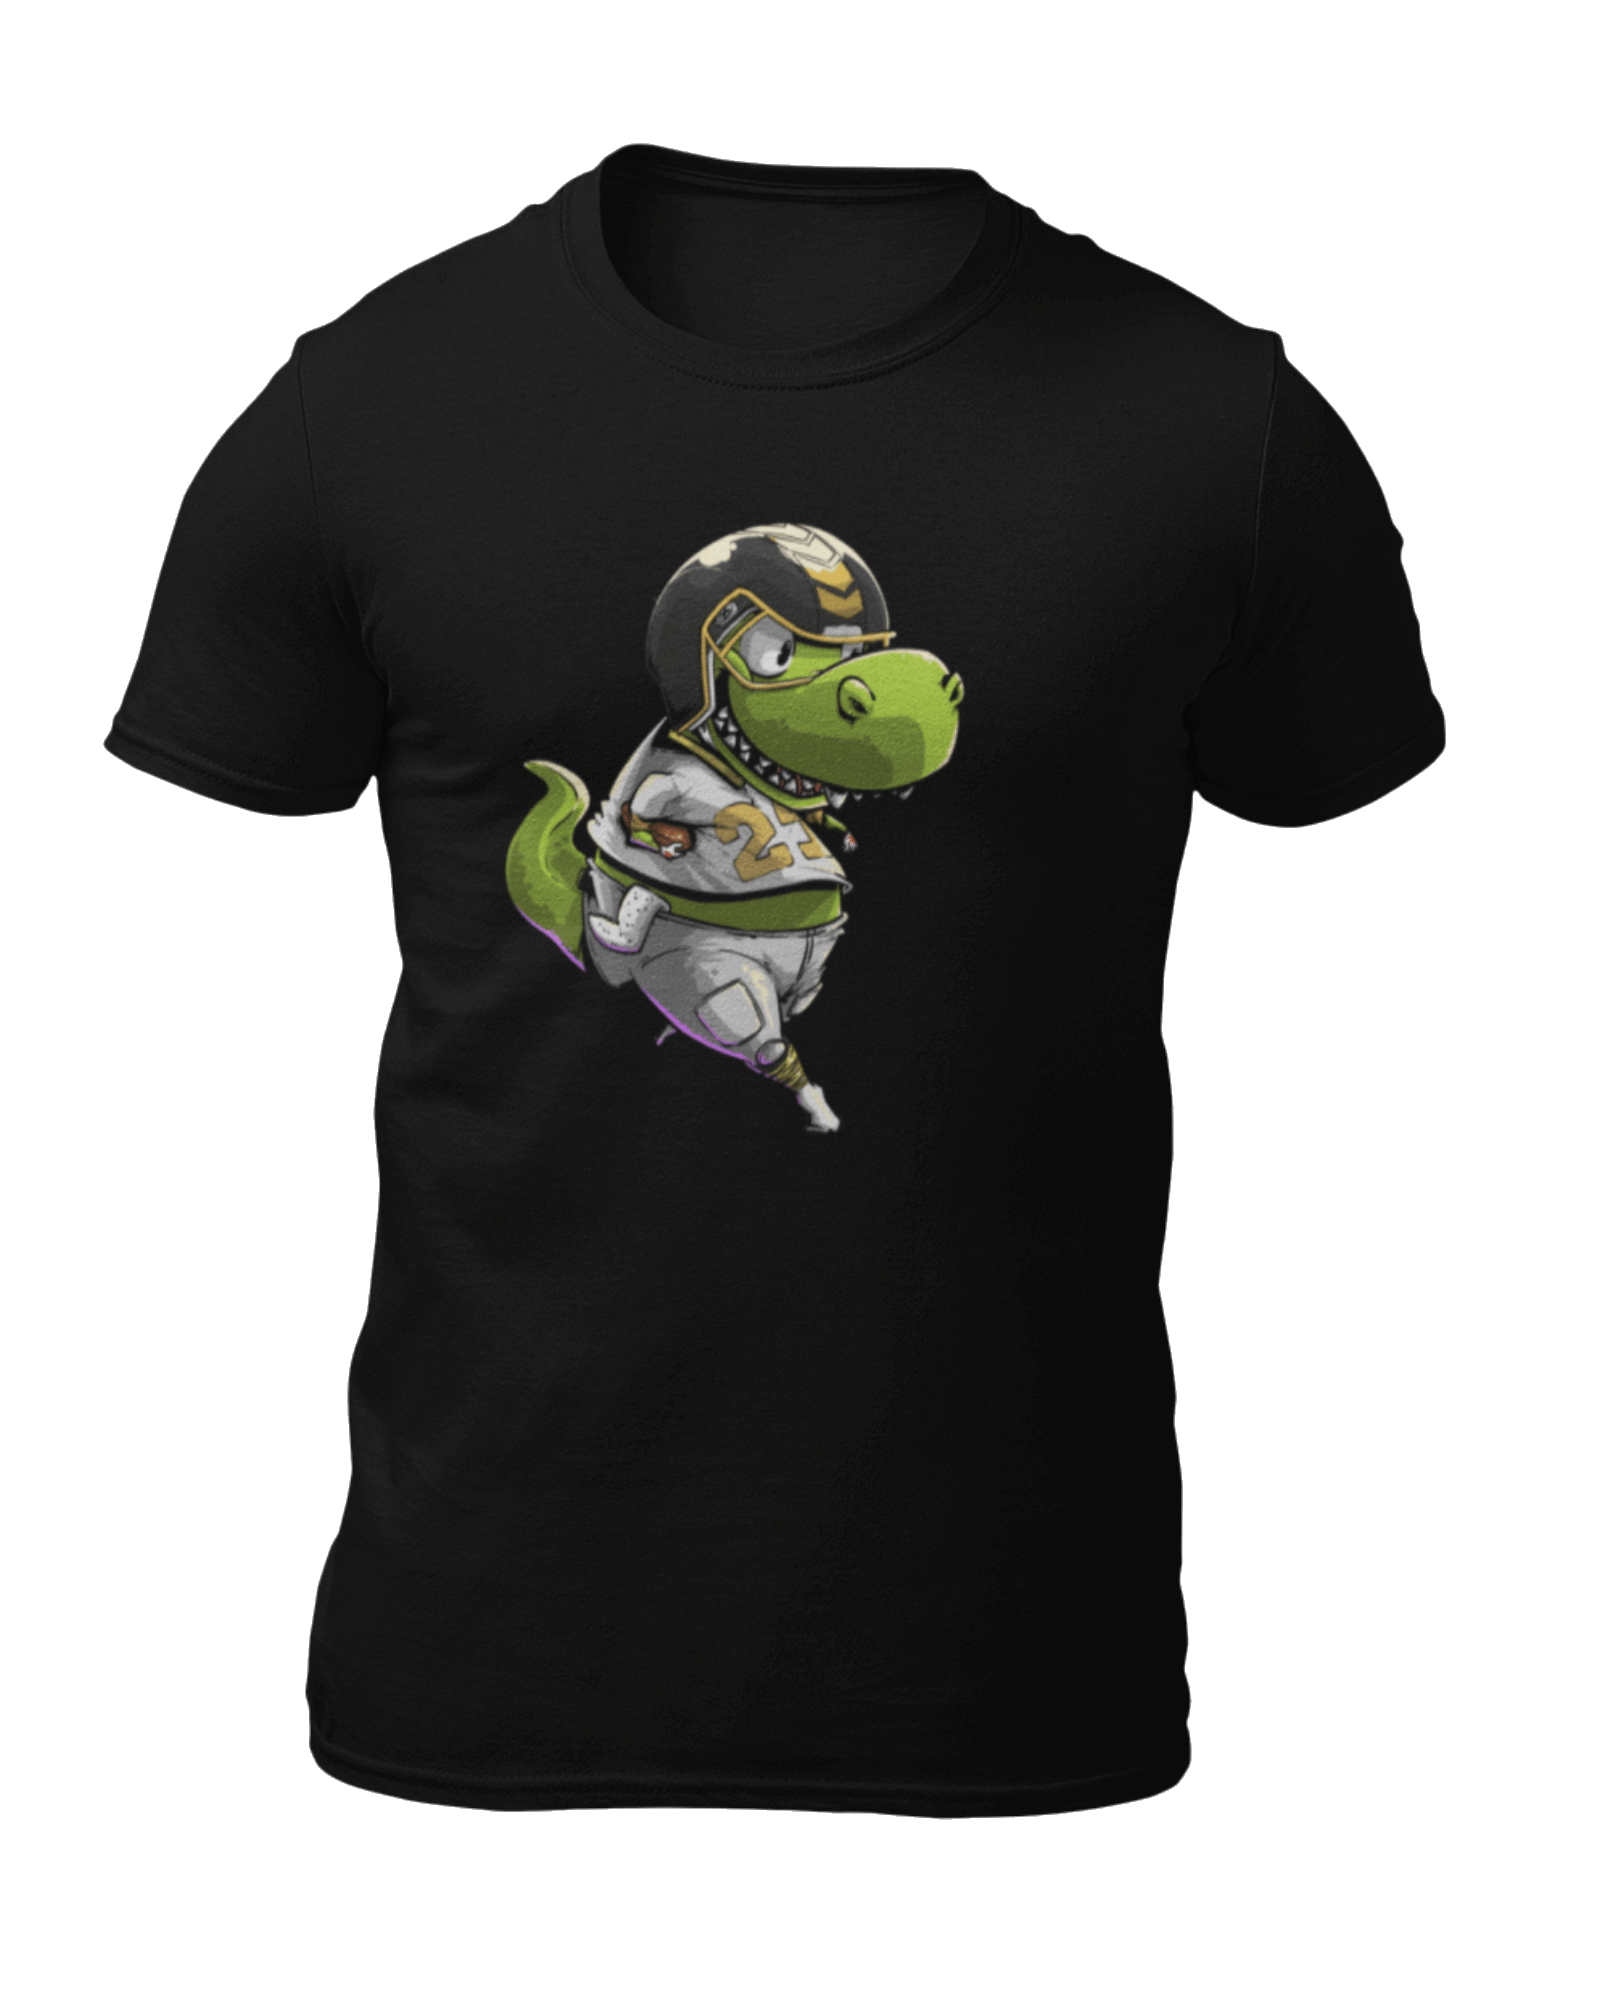 Football T-Shirts With Dinosaurs, TRex, T-Rex, For Kids And Adults